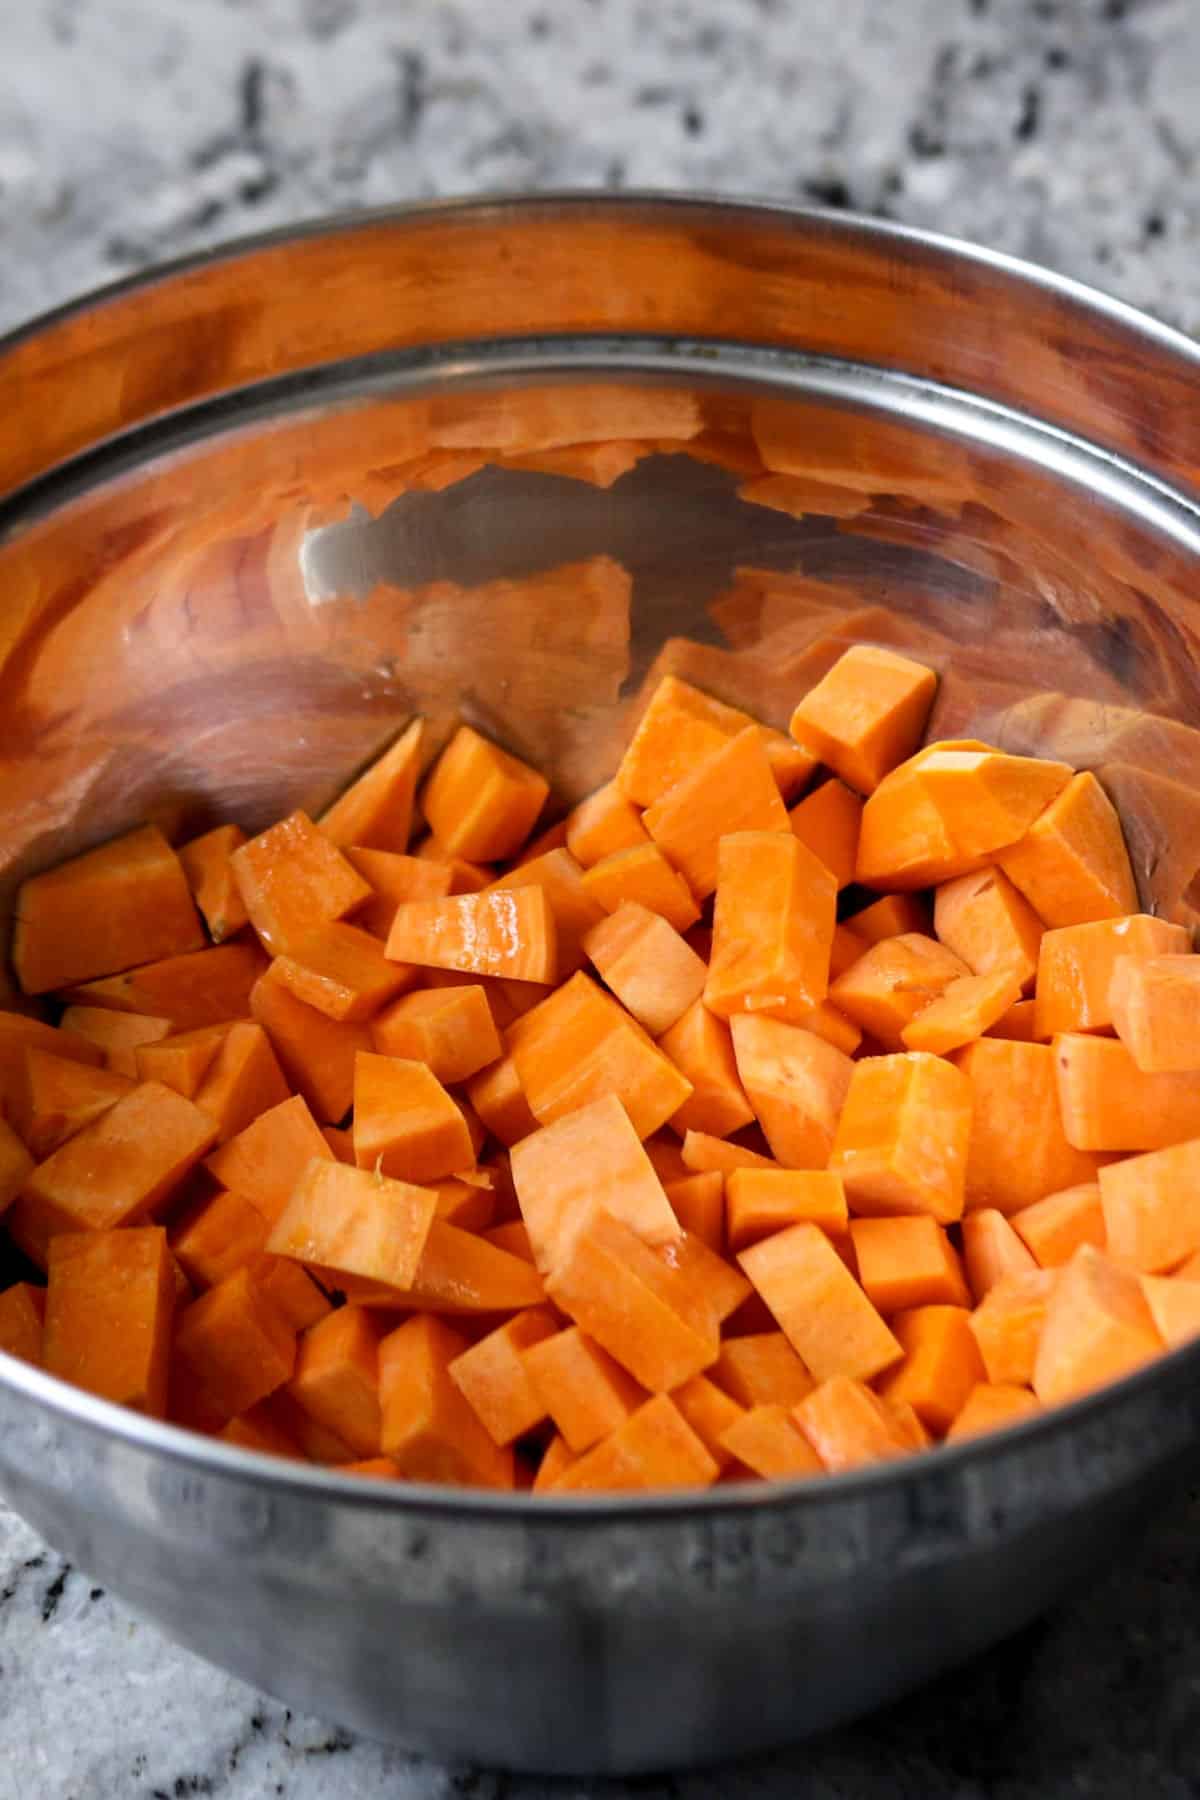 Diced sweet potatoes in bowl